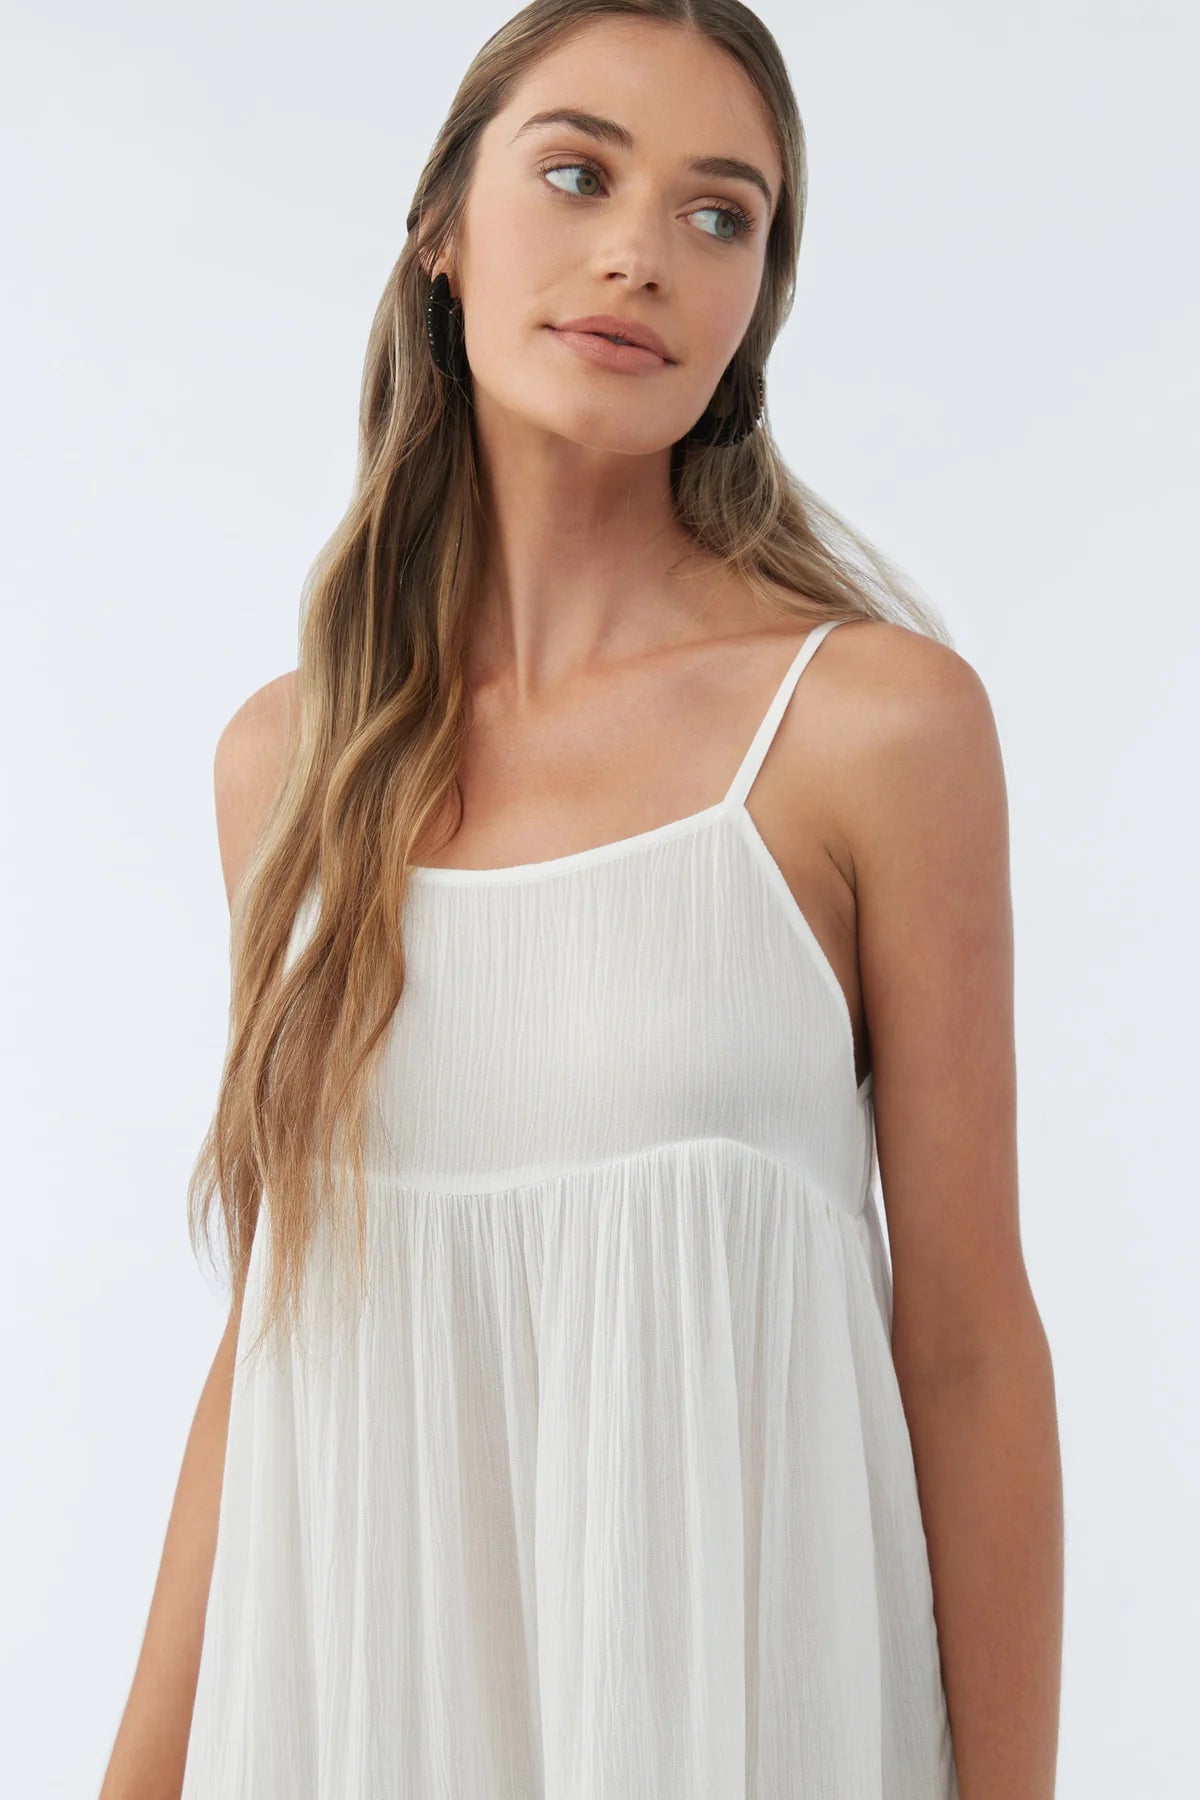 O'Neill Rilee Short Tank Coverup Dress (Non-Current)